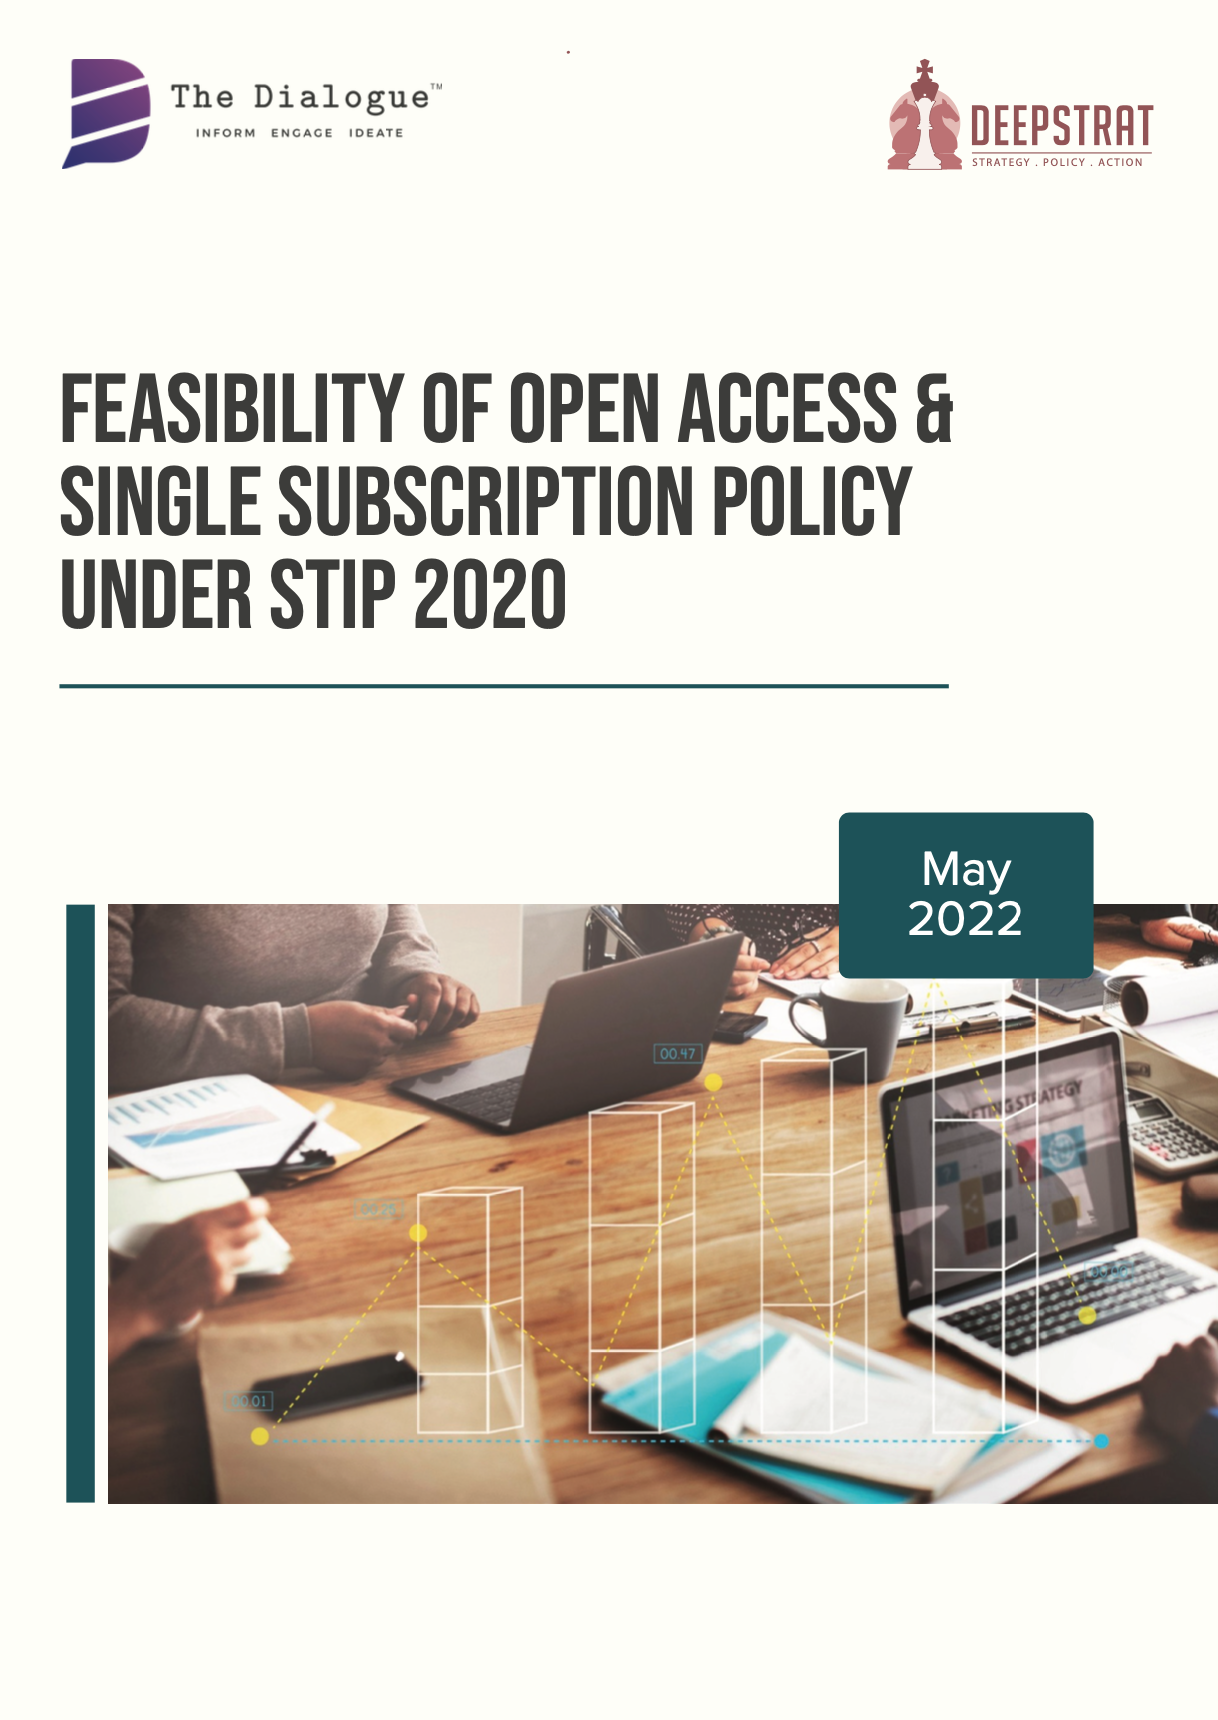 Feasibility of Open Access & Single Subscription Policy under STIP 2020